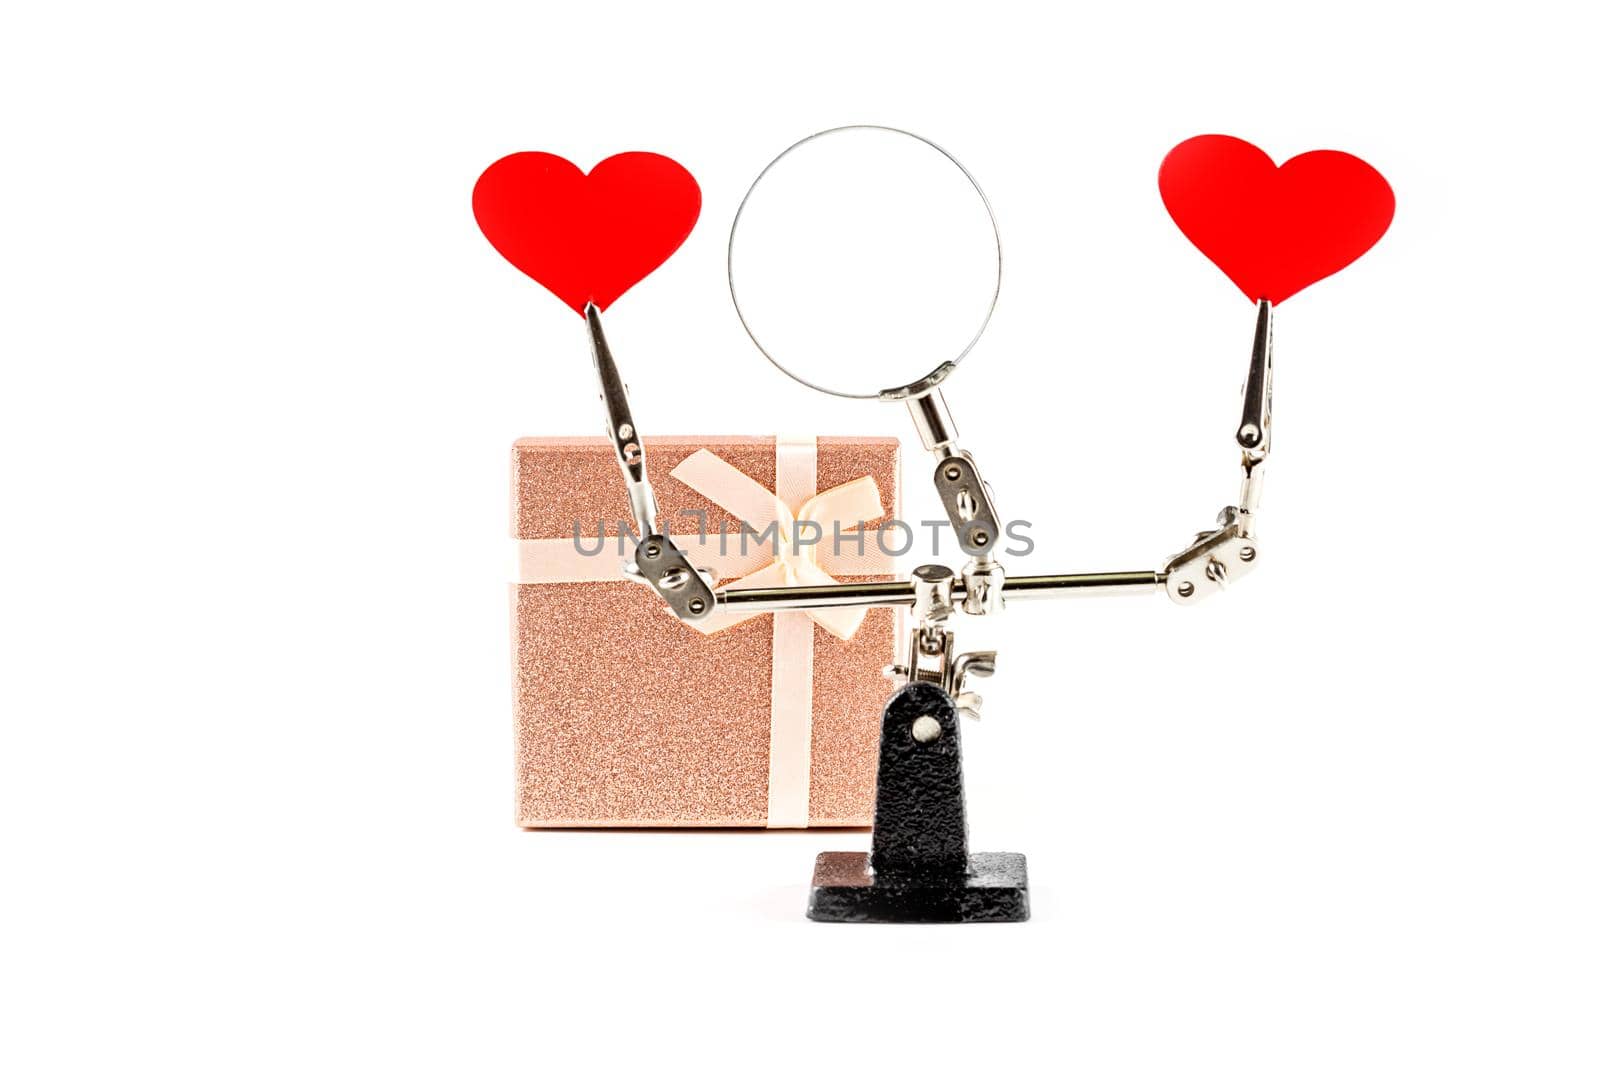 Valentines Day background with tool third hand holding hearts and gift by galinasharapova